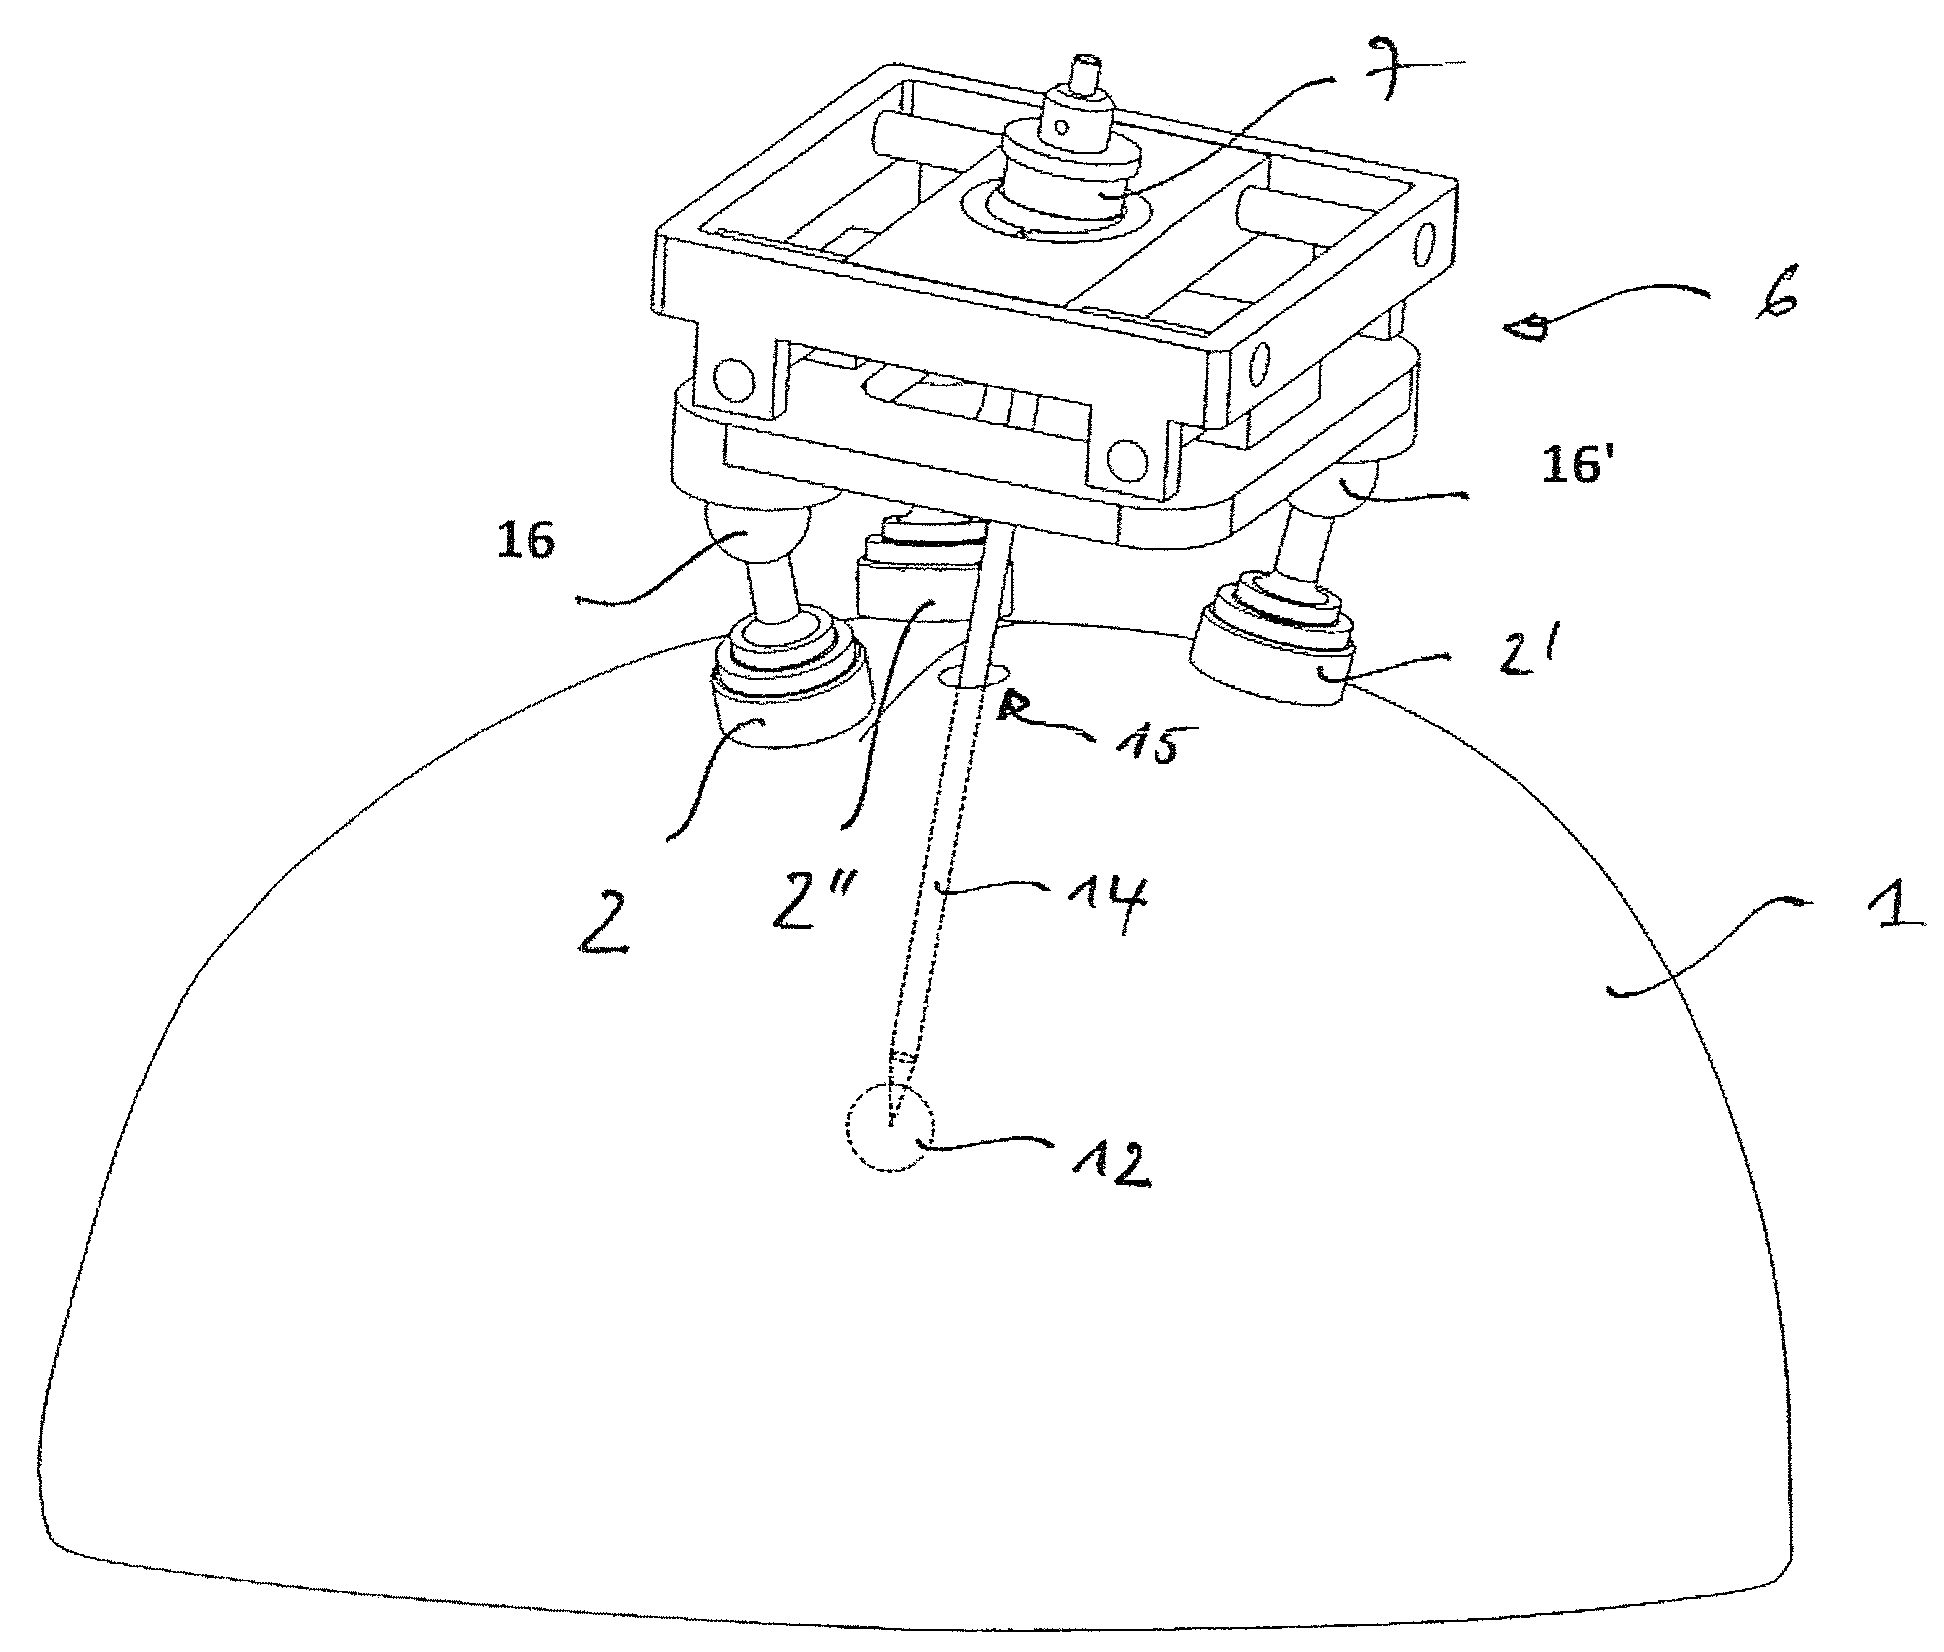 Adjustable stereotactic device and method for frameless neurosurgical stereotaxy